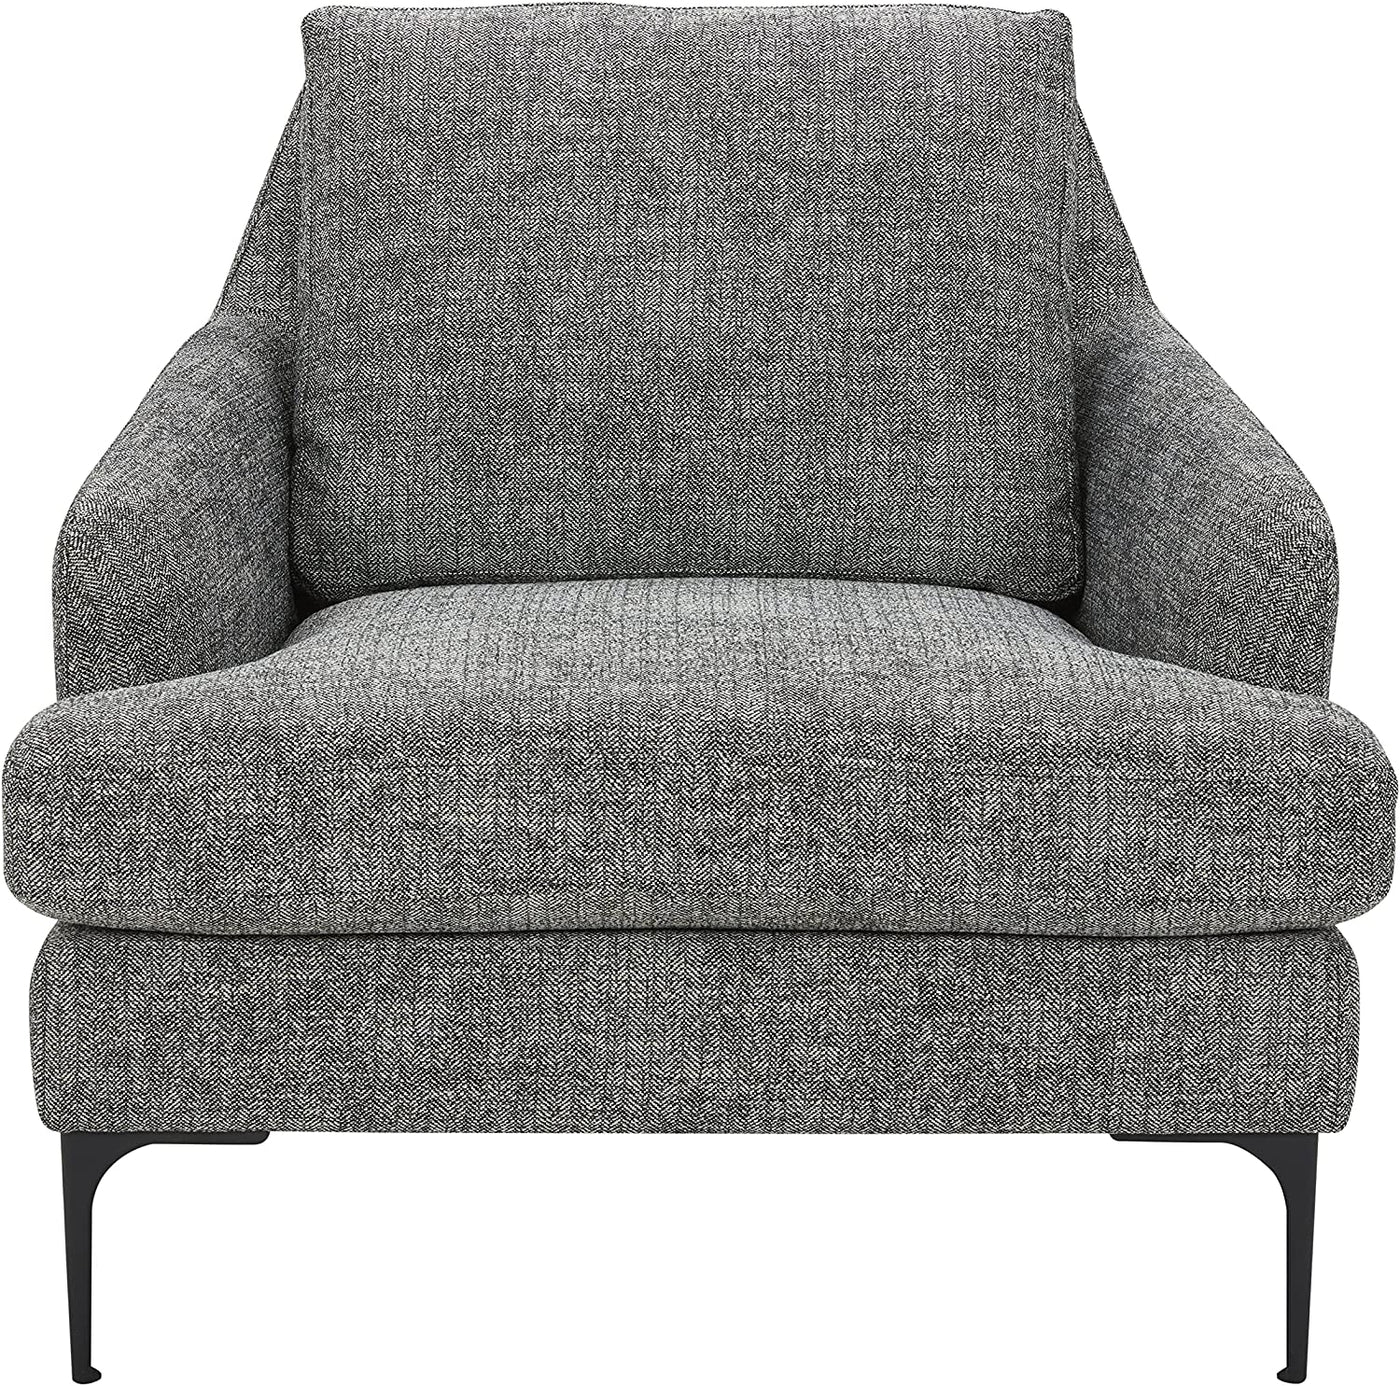 Rivet Modern Living Room Accent Chair with Metal Legs, 35.4"W, Dark Gray- $320